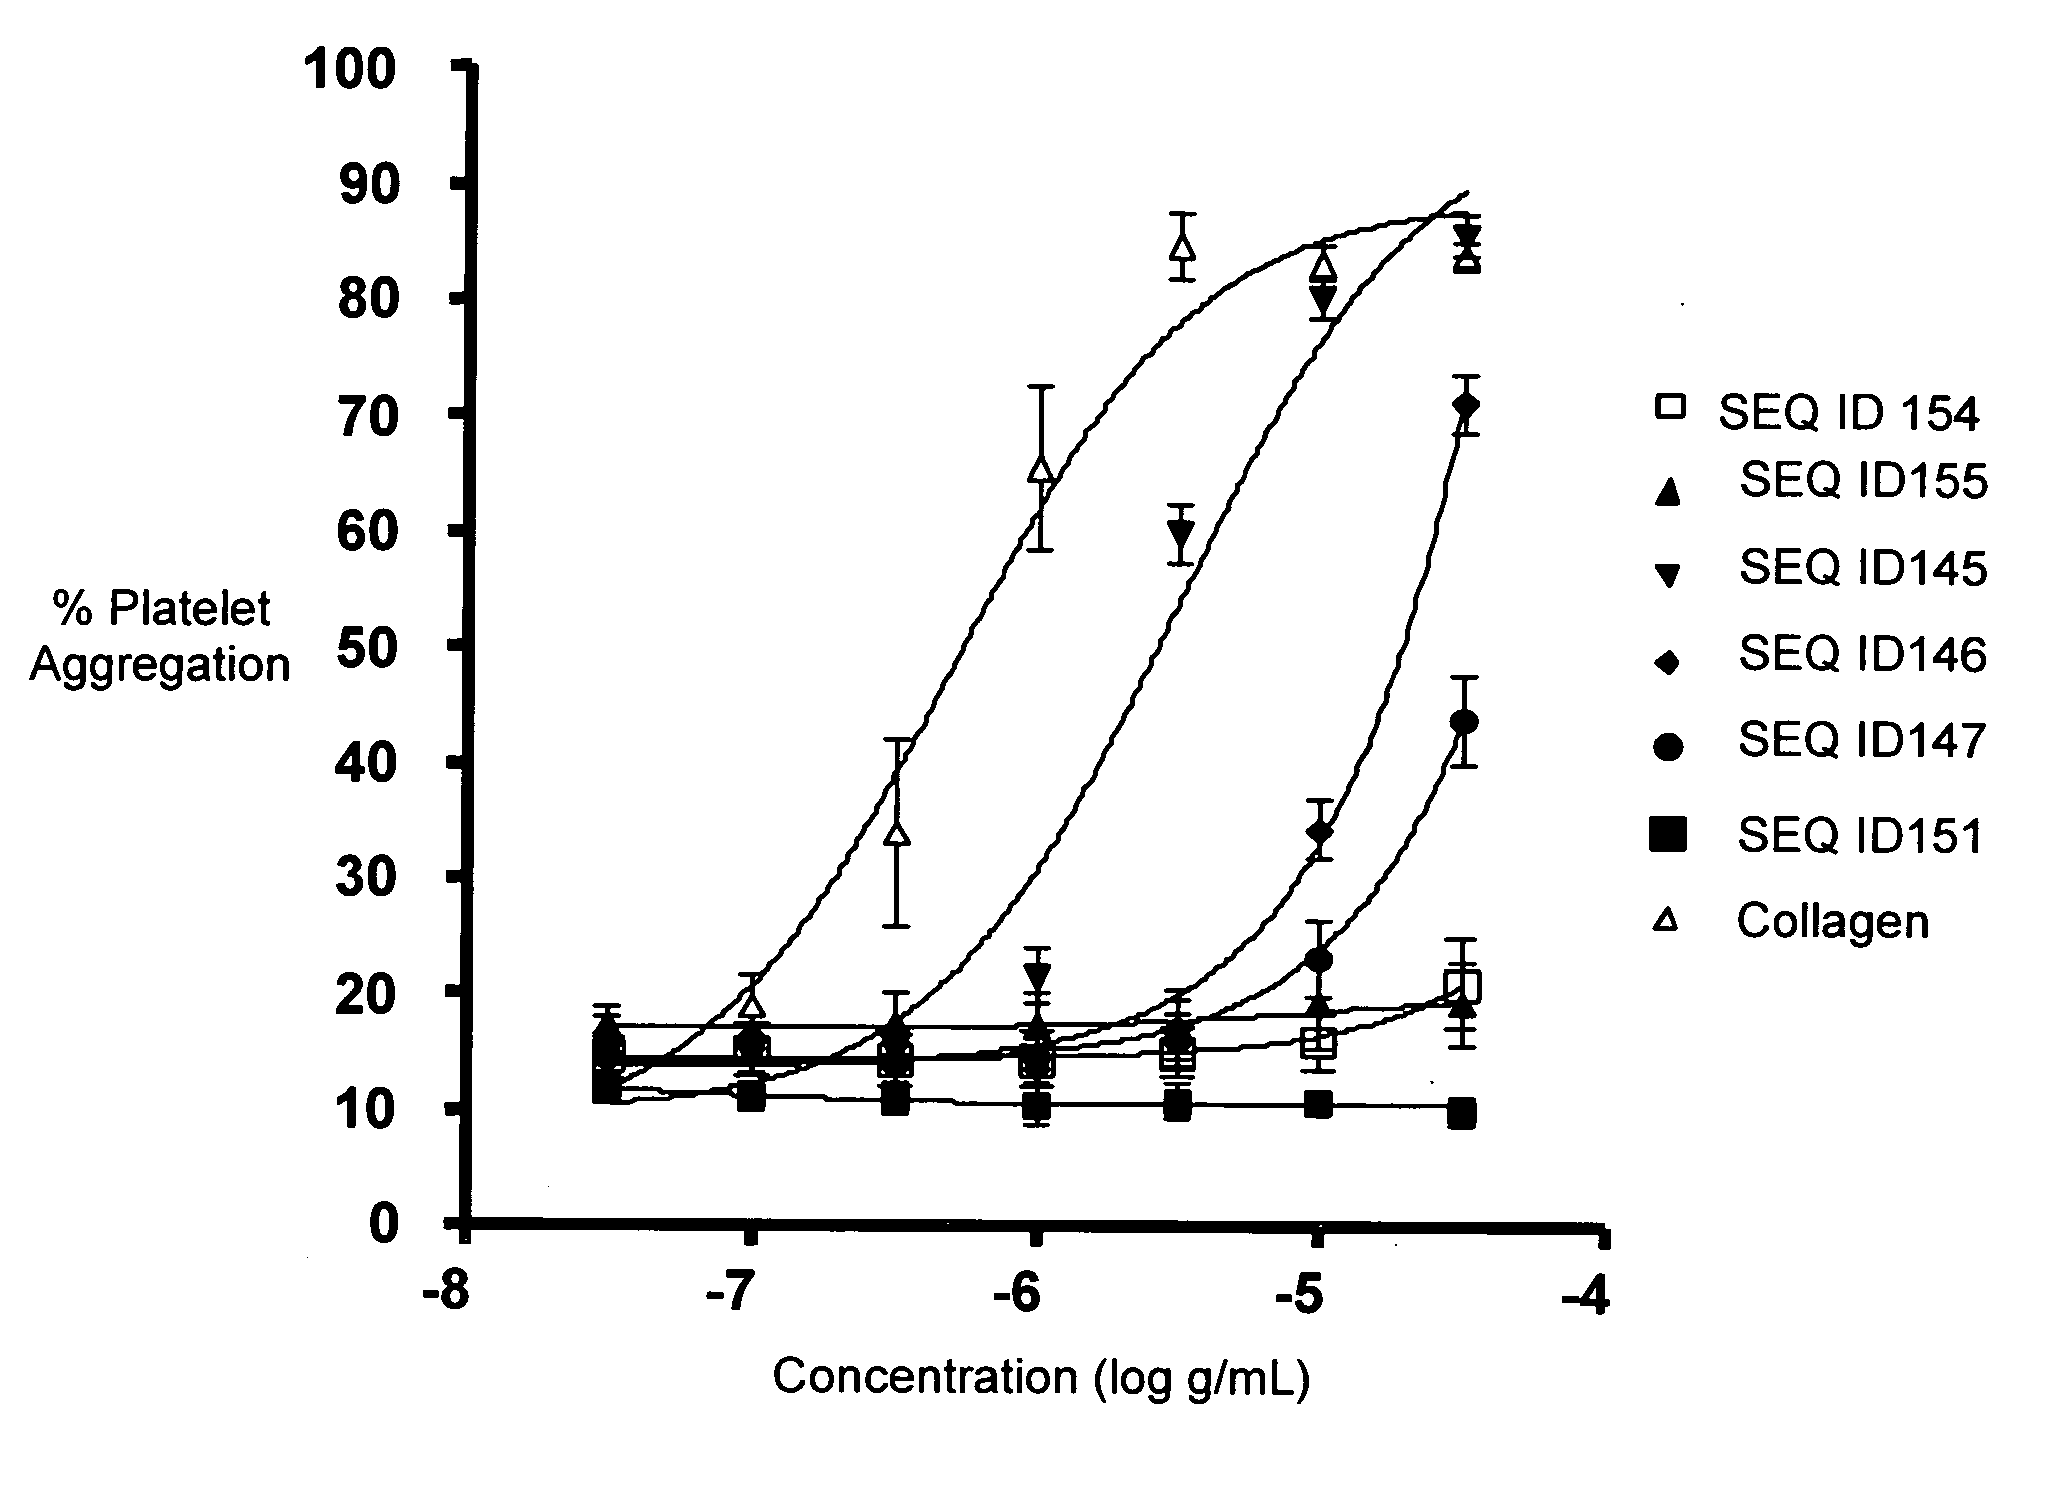 Collagen-related peptides